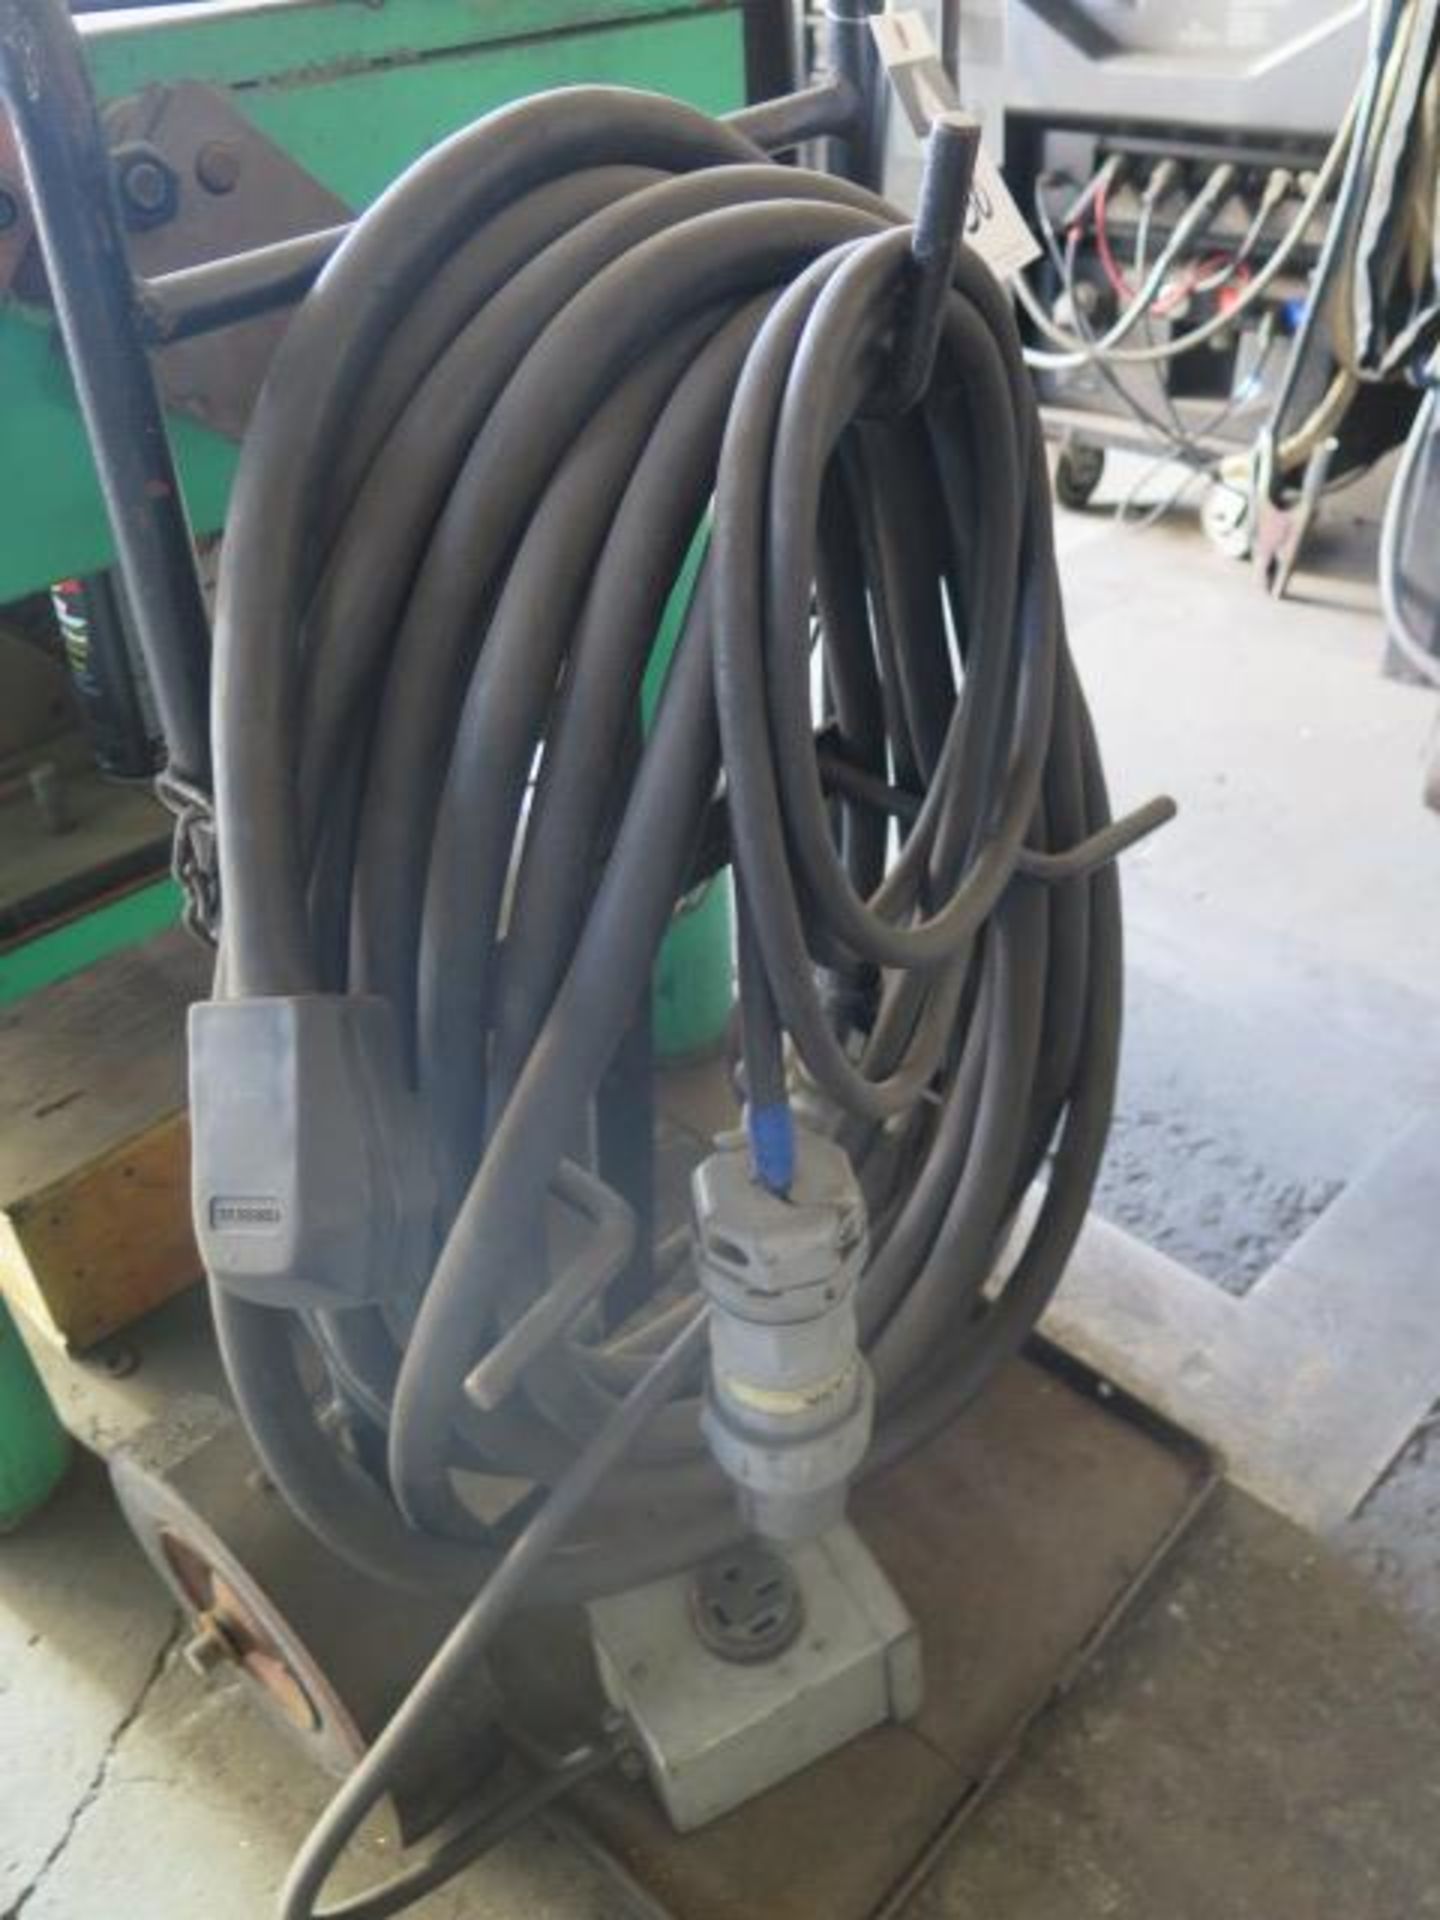 Welding Extension Cord w/ Cart (SOLD AS-IS - NO WARRANTY)